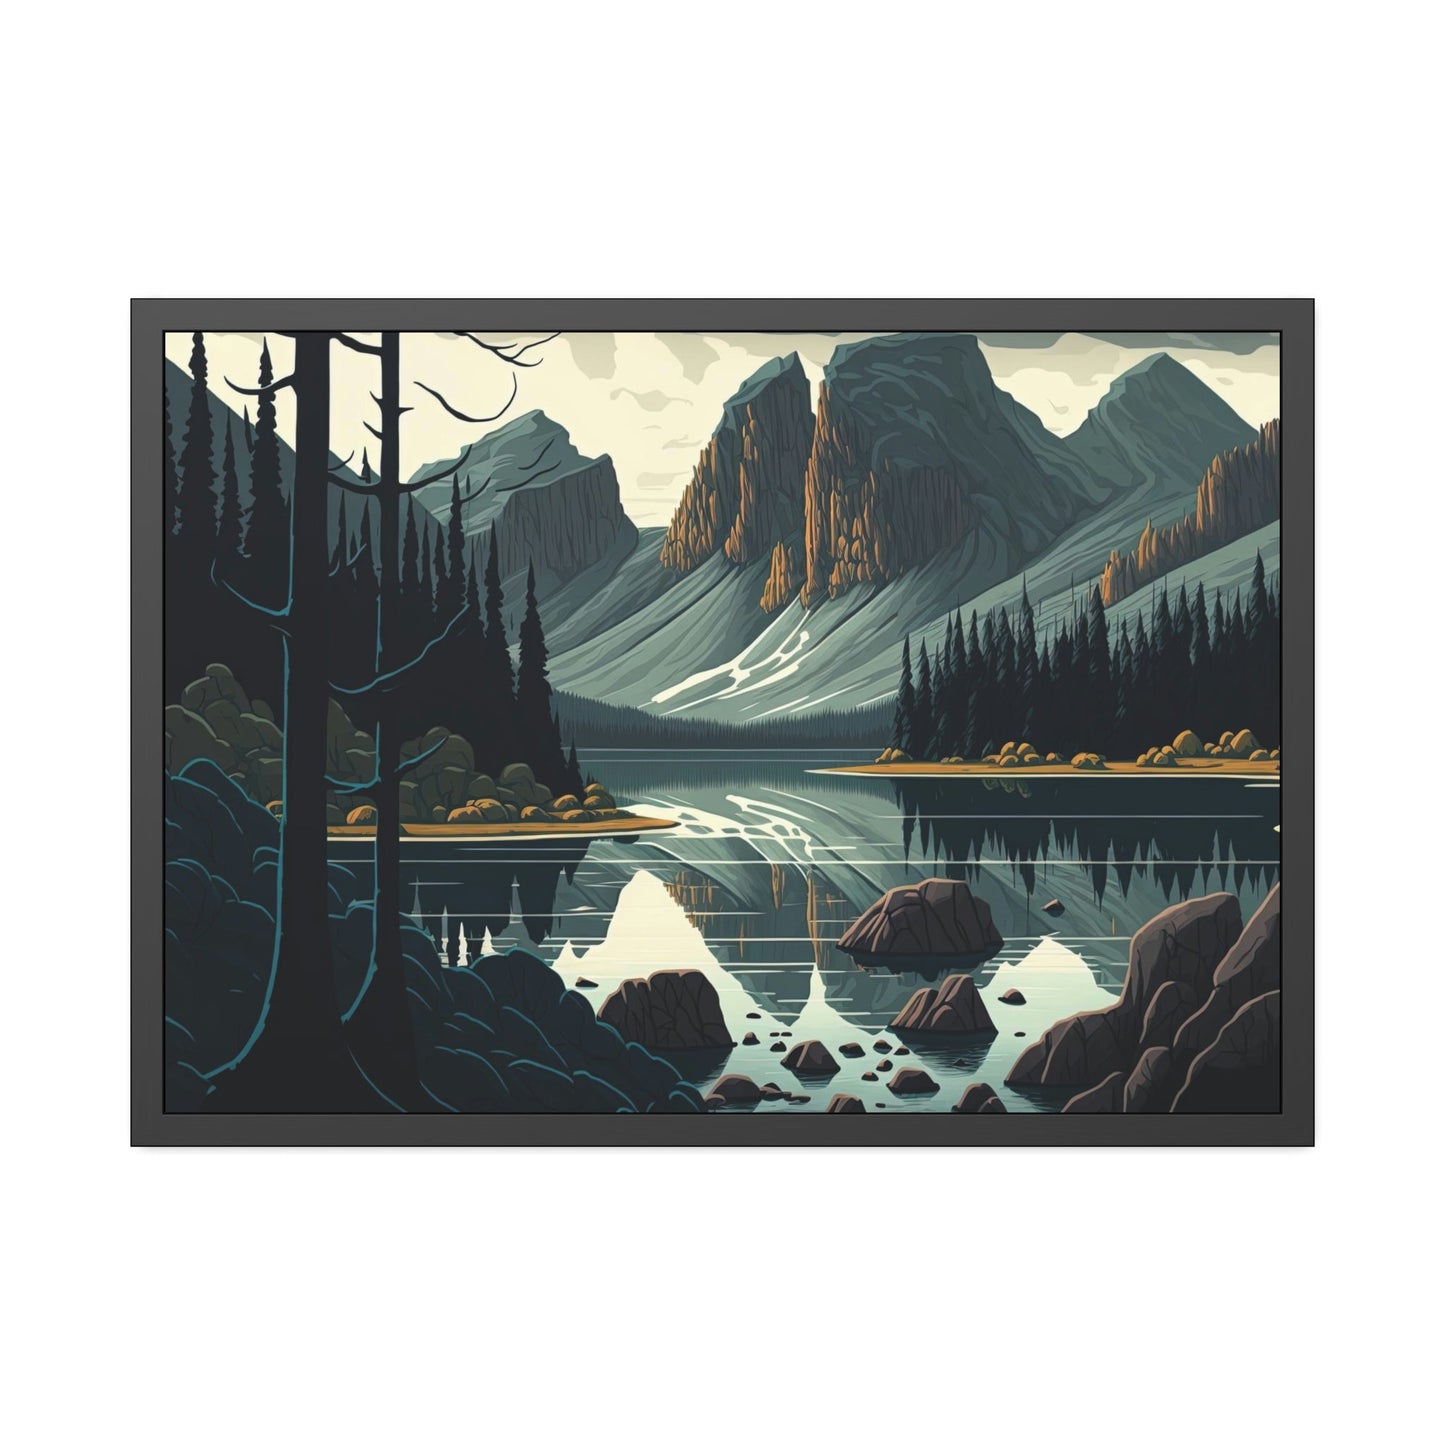 Reflections of the Lake: Framed Canvas Print of a Scenic Lake Scene